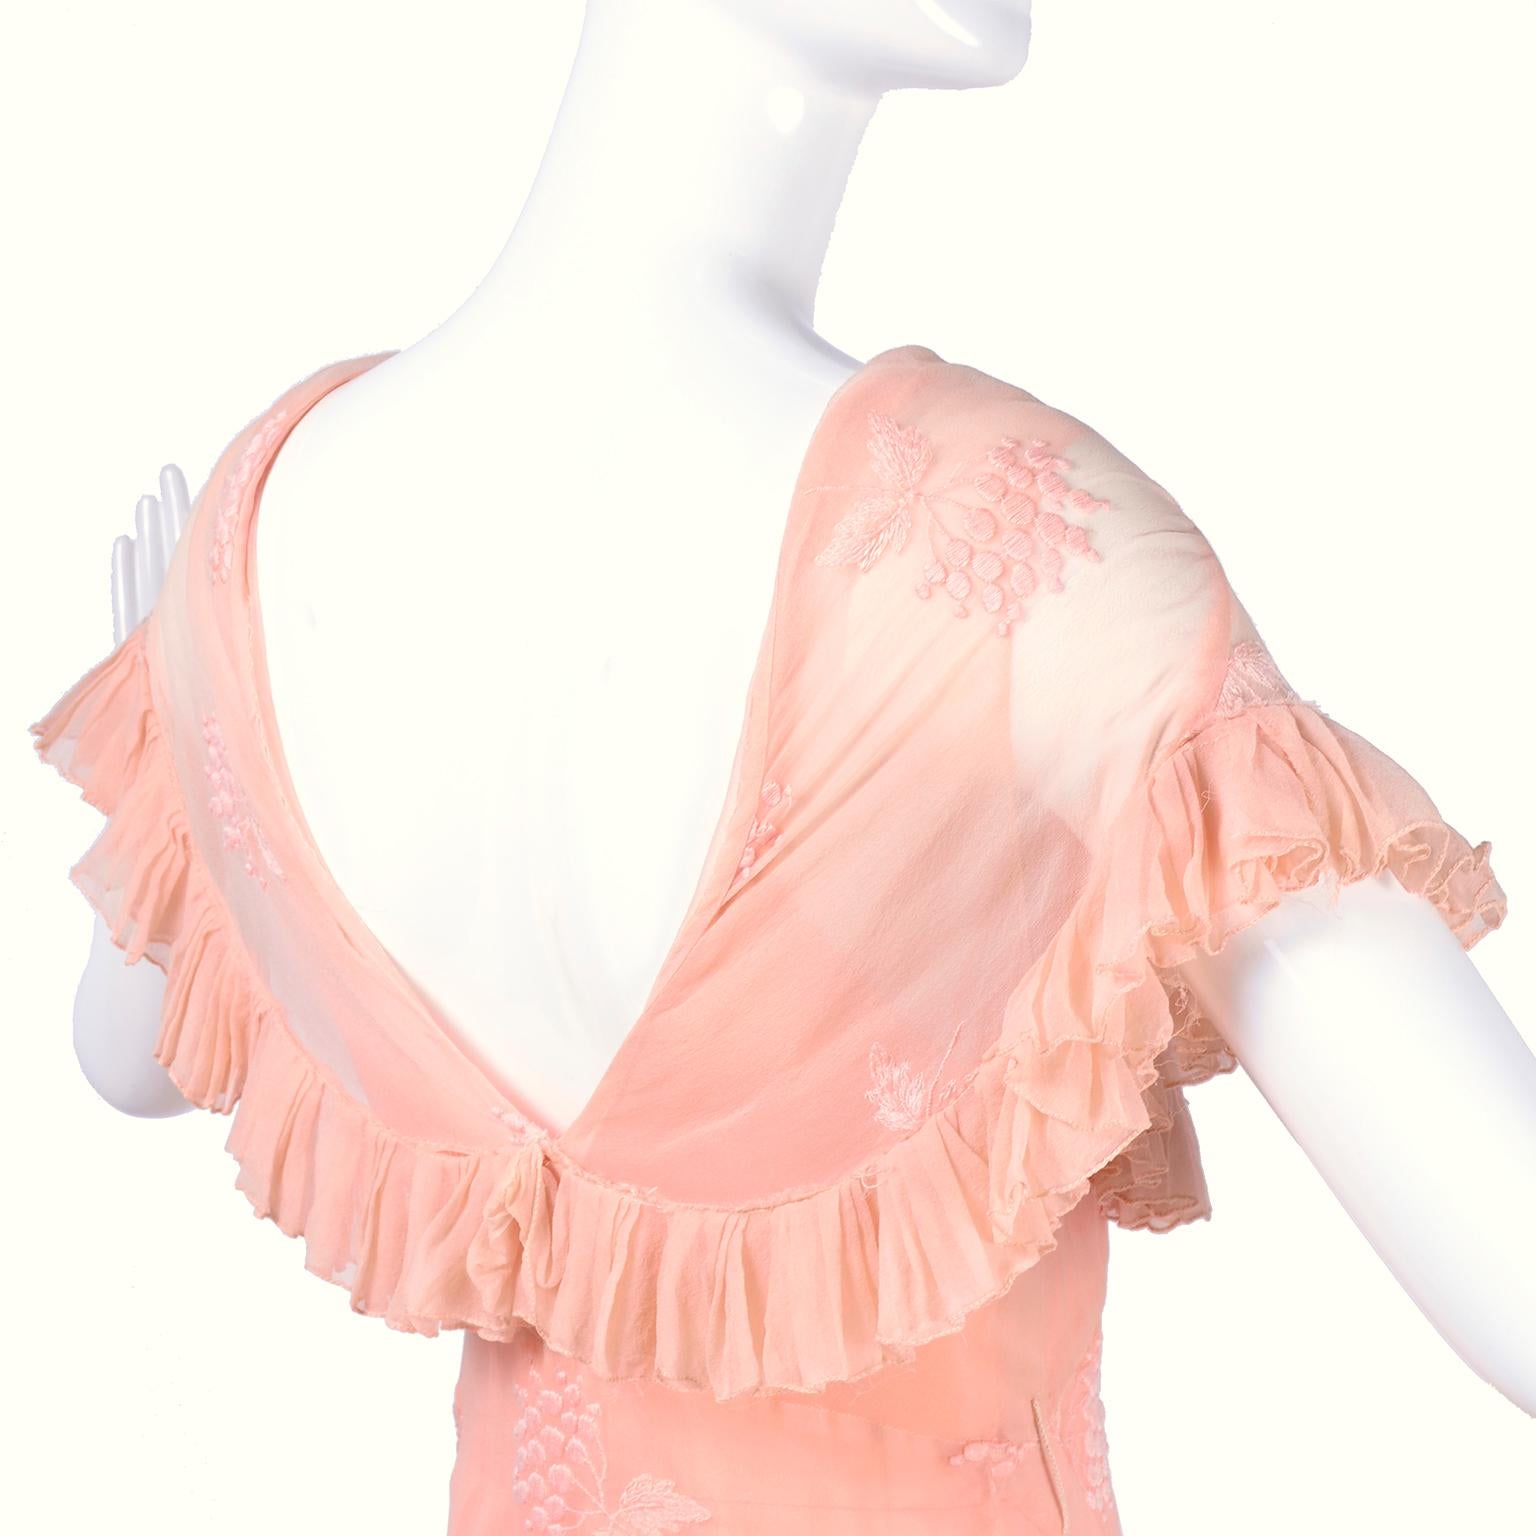 Vintage Bias Cut 1930s Dress With Embroidery in Pink Silk Chiffon  5